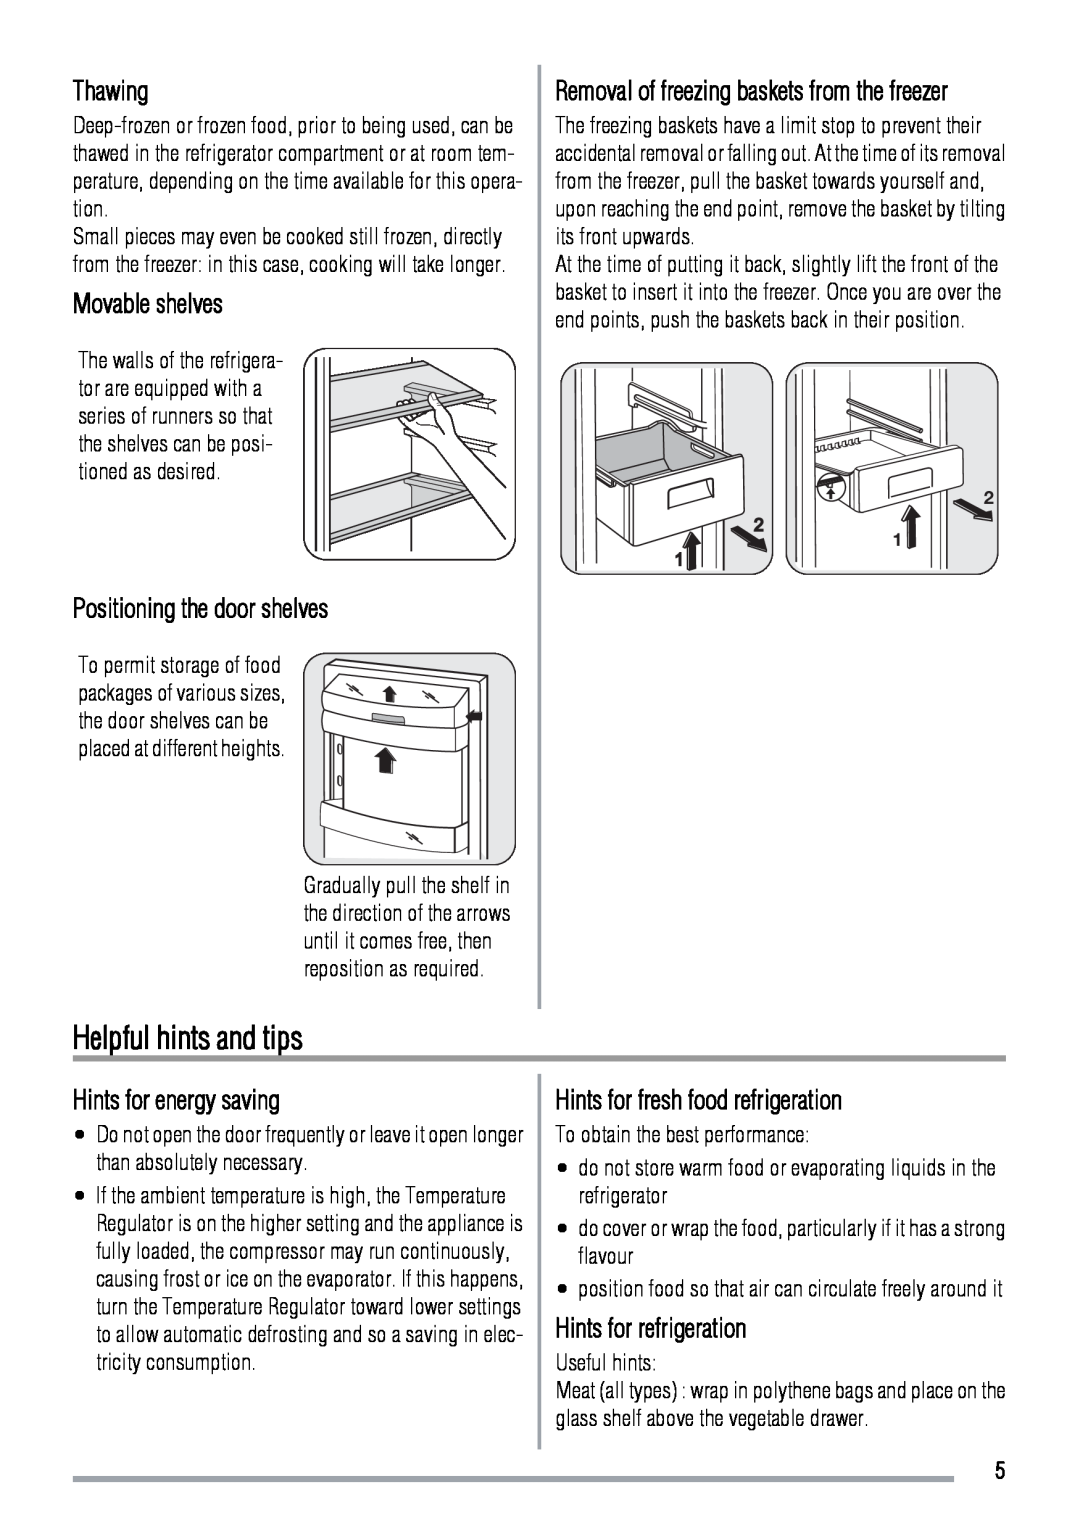 Zanussi ZRB634FS Helpful hints and tips, Thawing, Movable shelves, Positioning the door shelves, Hints for energy saving 